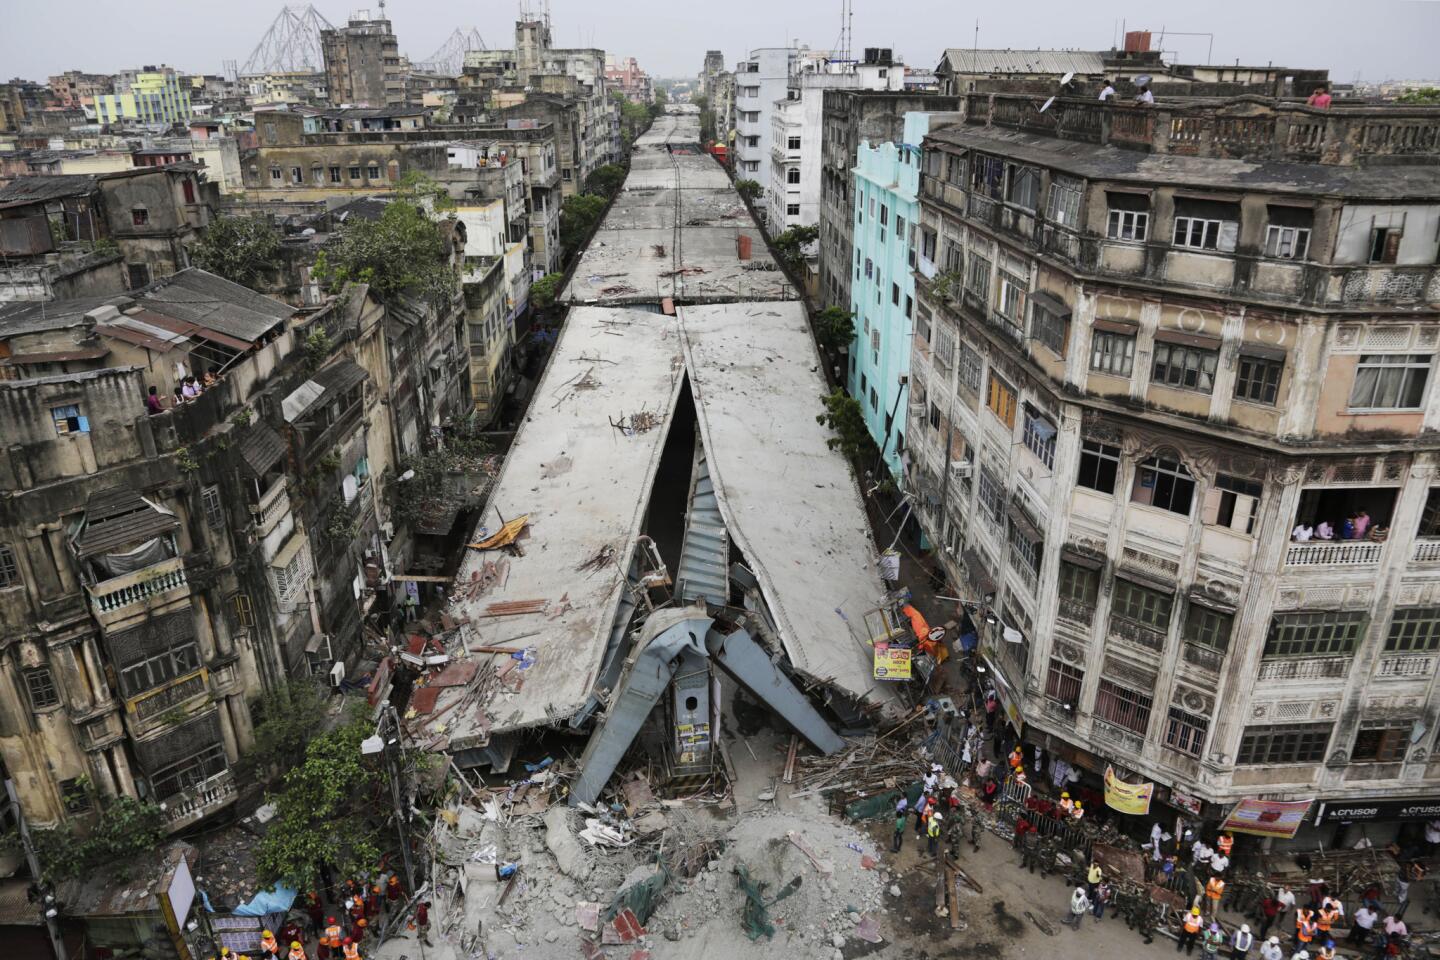 General view shows a partially collapsed overpass in Kolkata, India, on April 1, 2016.